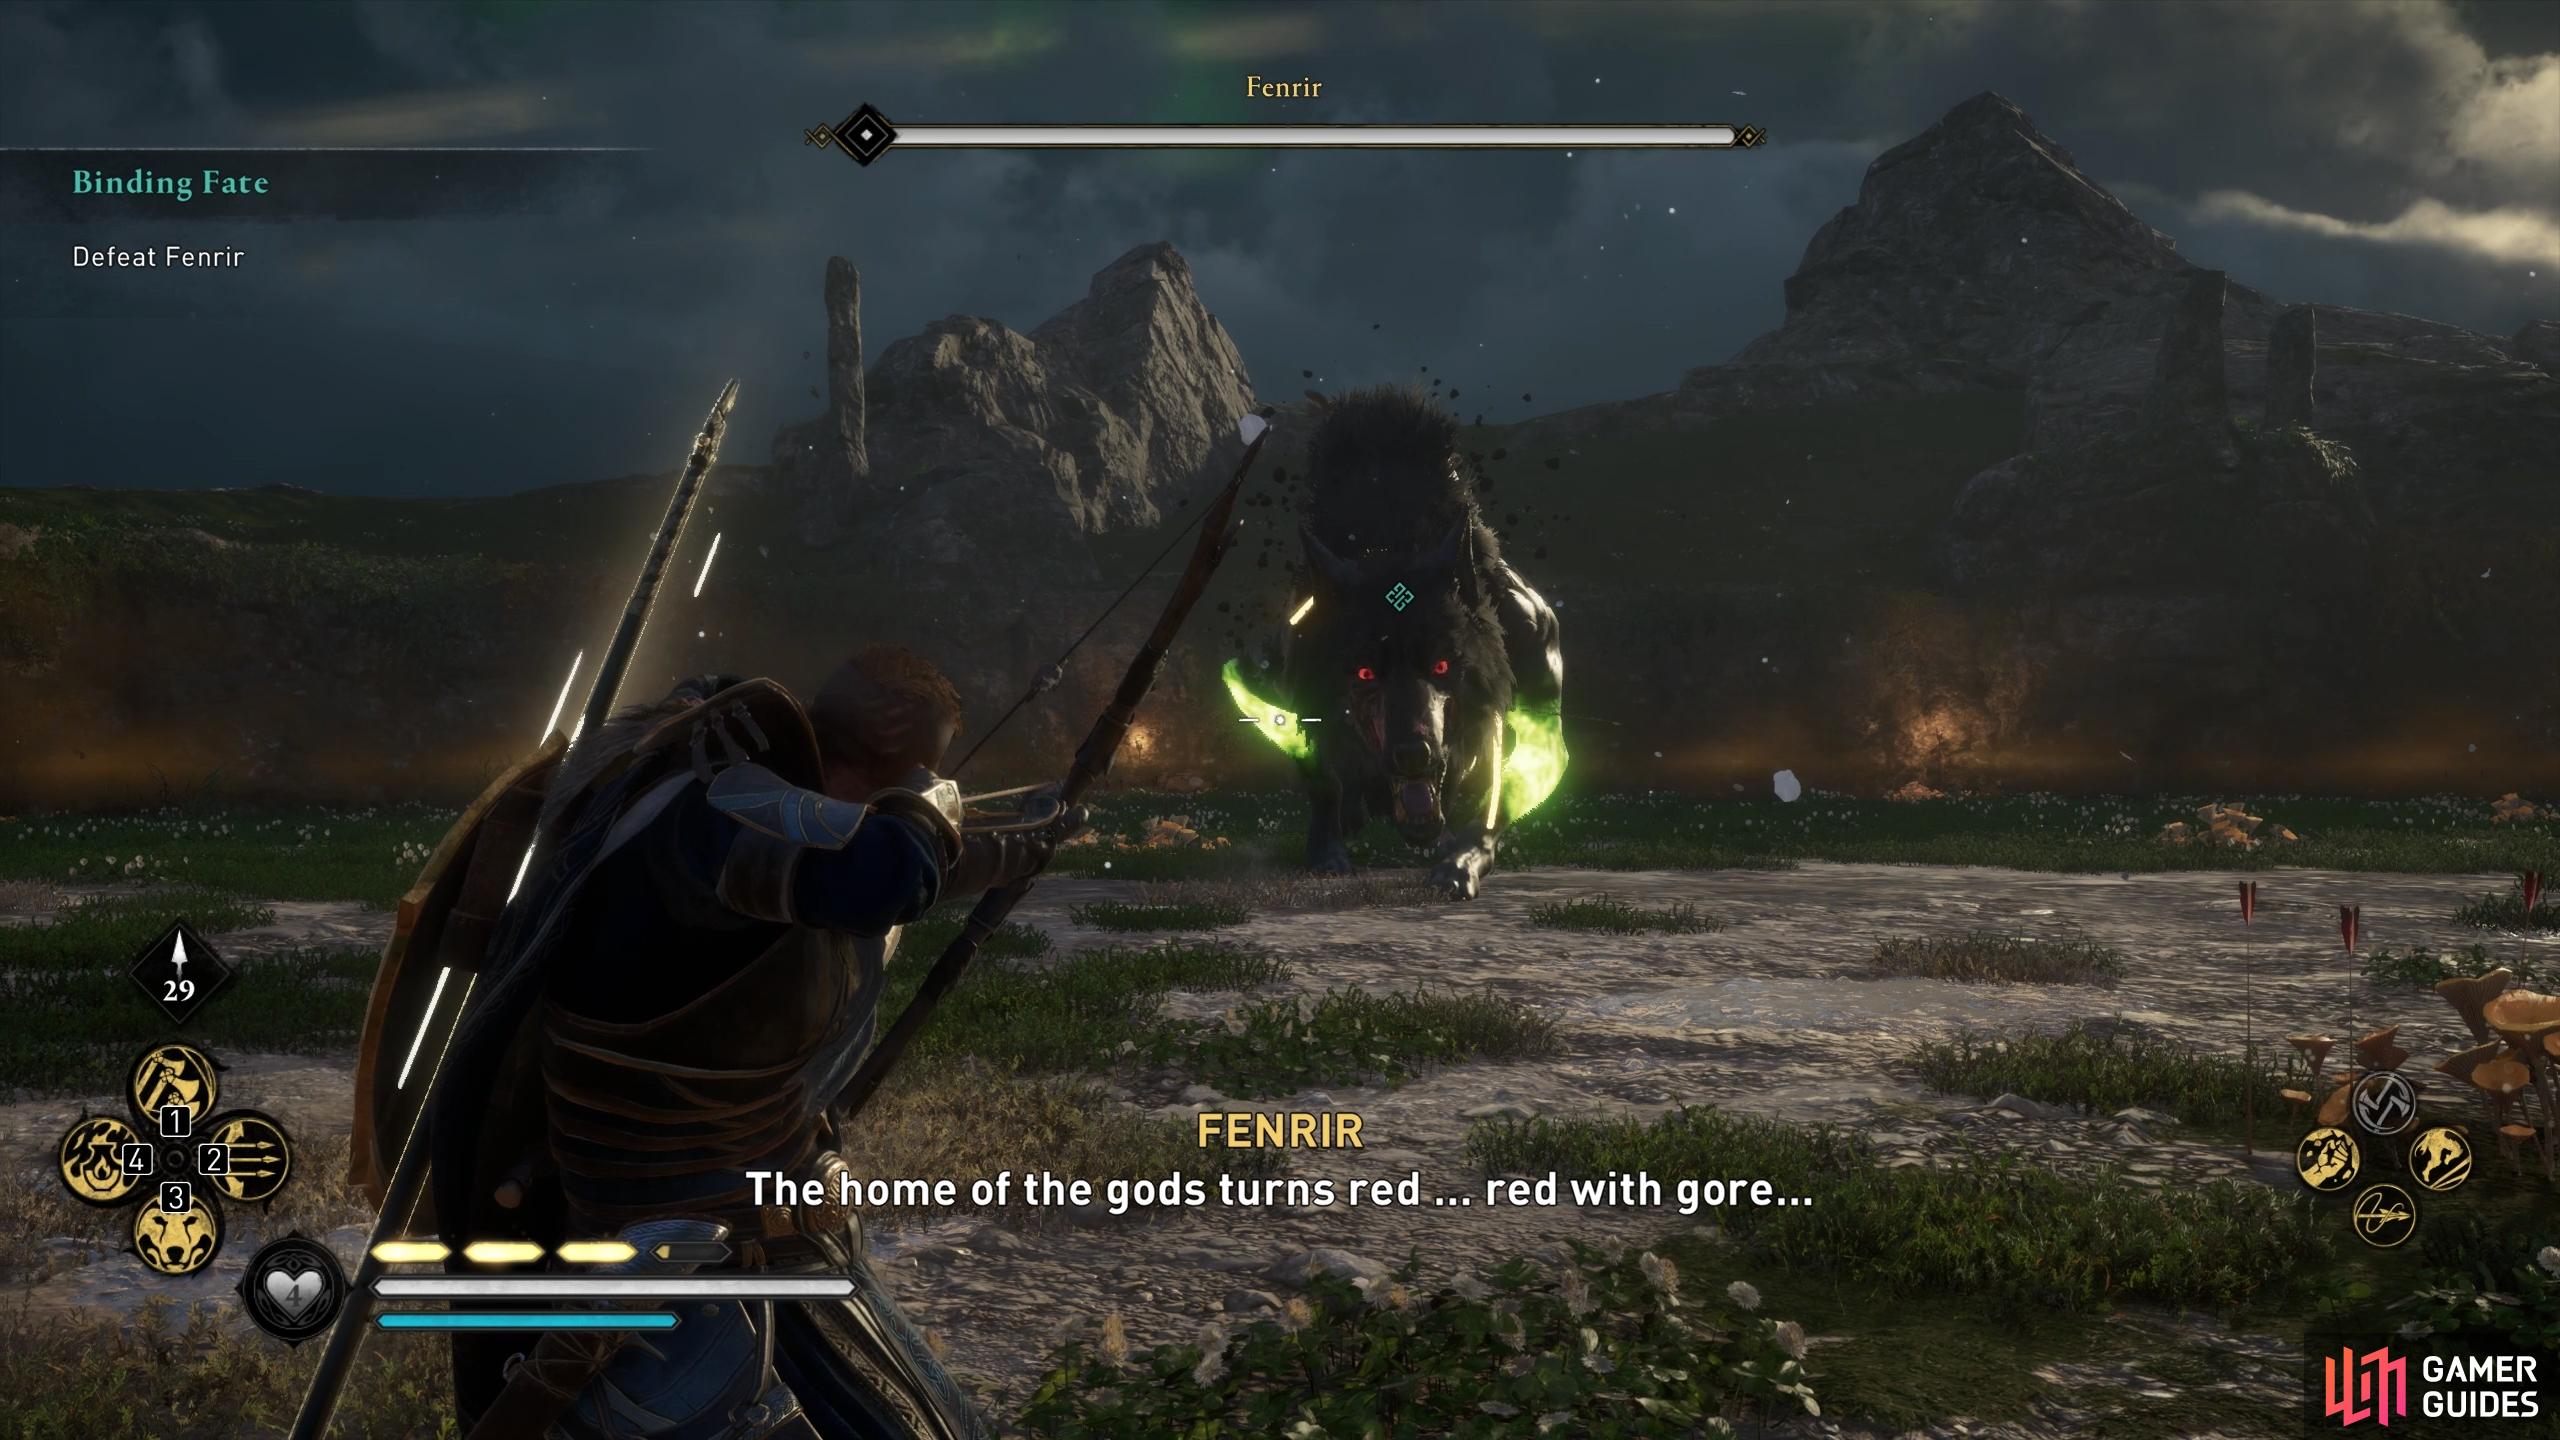 You'll be spending most of your time during this fight shooting at Fenrir's legs, where his weak points can be found.